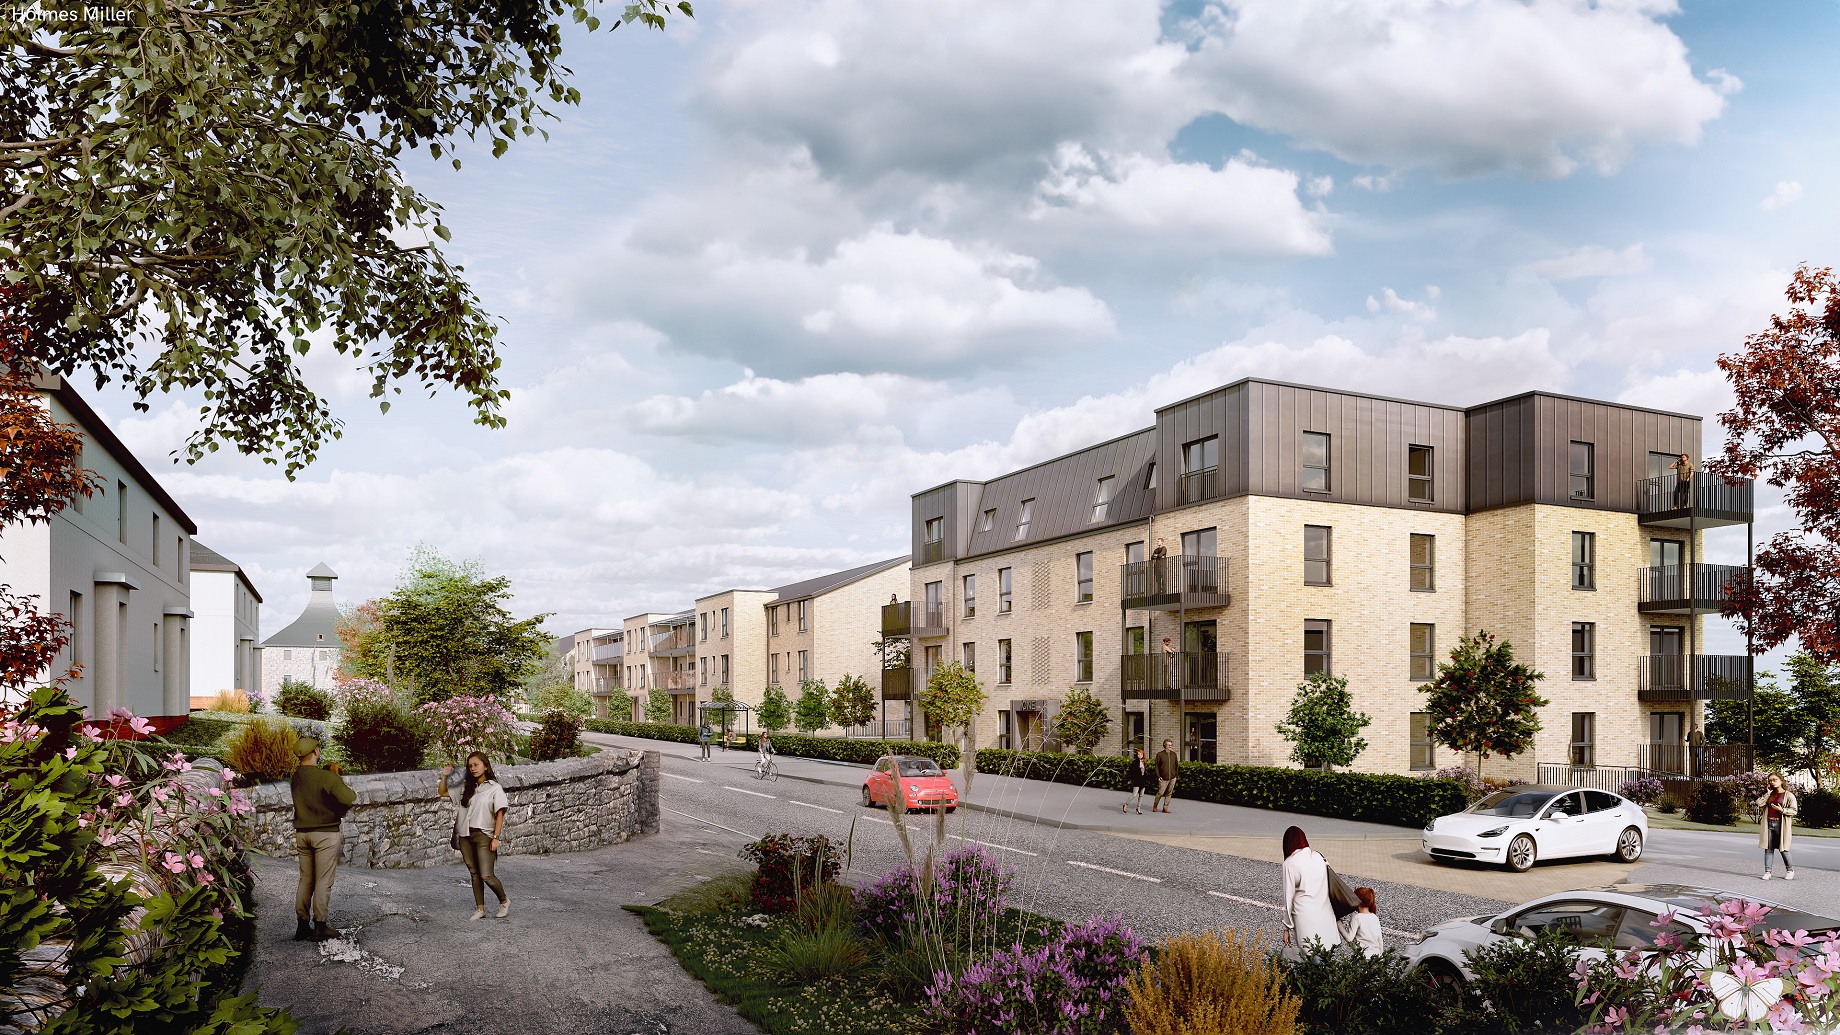 Linlithgow care home and flats project goes to planning